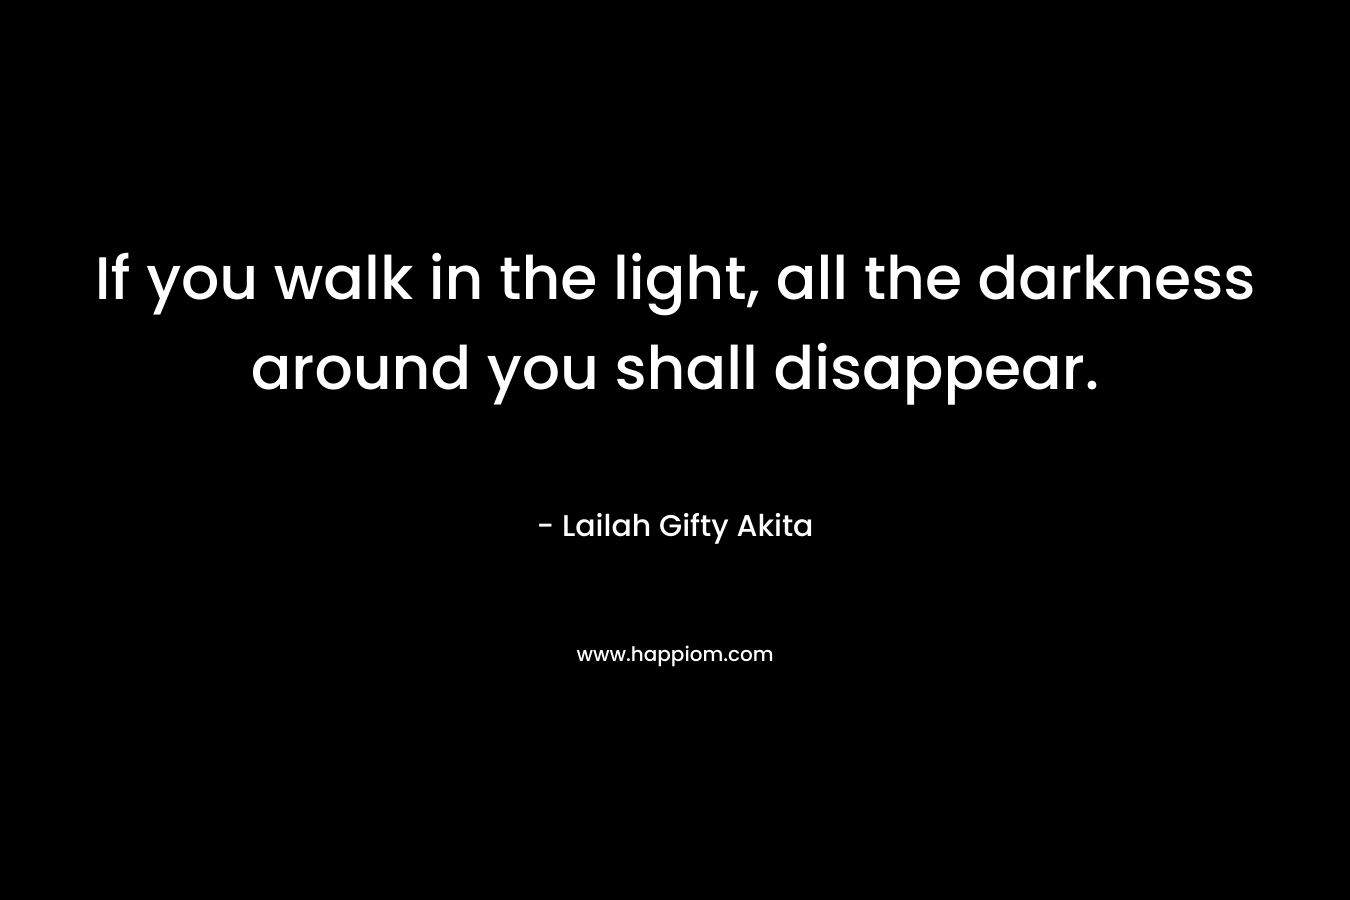 If you walk in the light, all the darkness around you shall disappear.